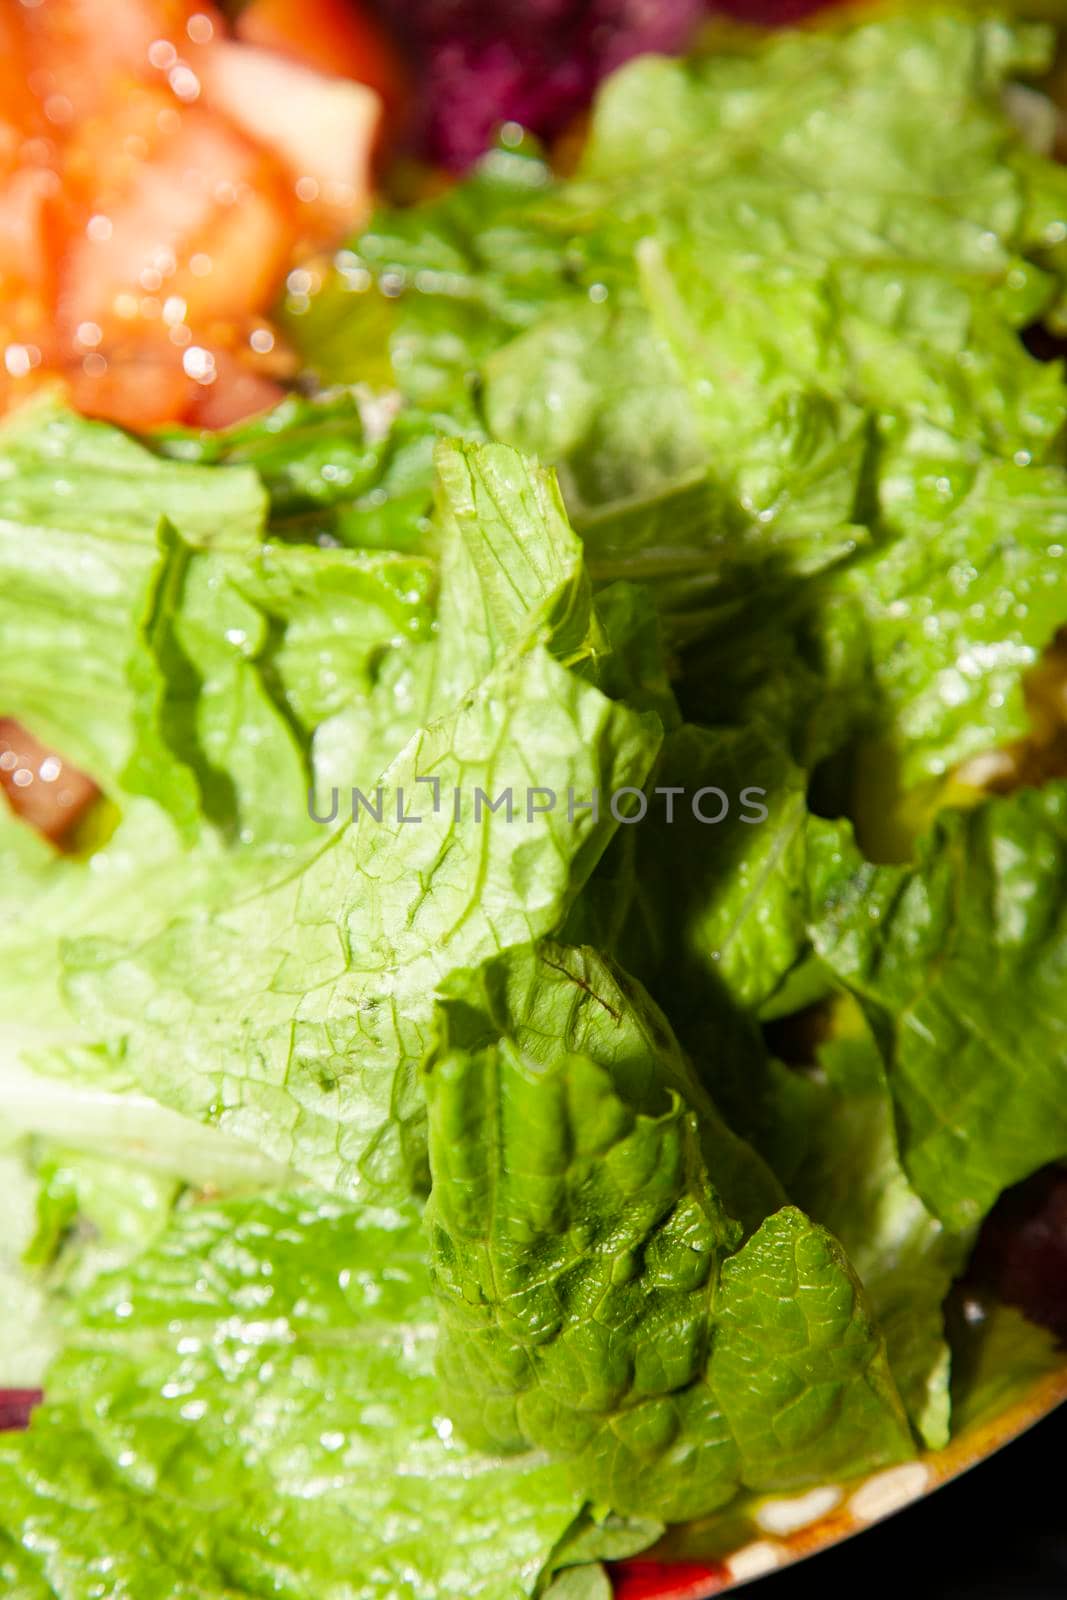 Fresh salad made from romaine lettuce and diced tomato